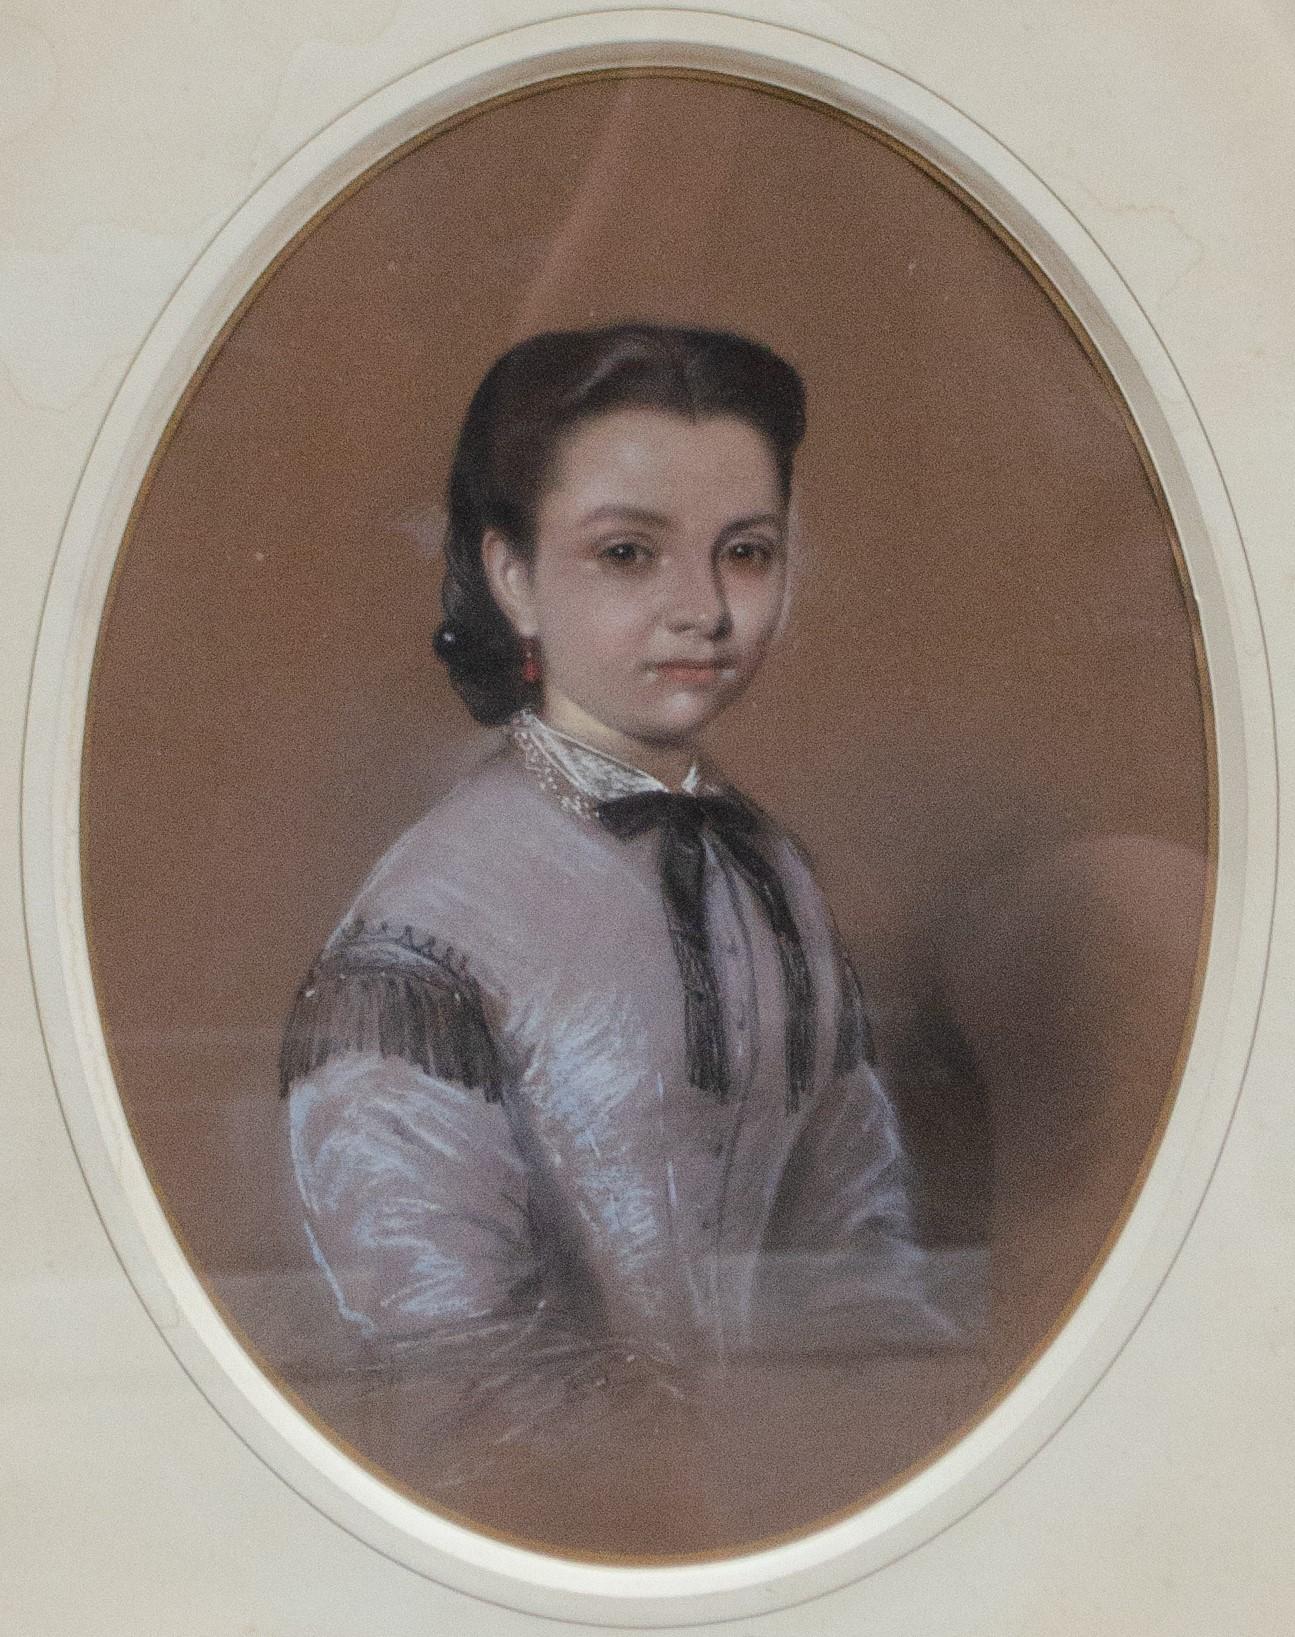 Portrait Of A Young Girl  In A Lilac Dress With A Black Bow. Circa 1860. SIgned. - Painting by Unknown